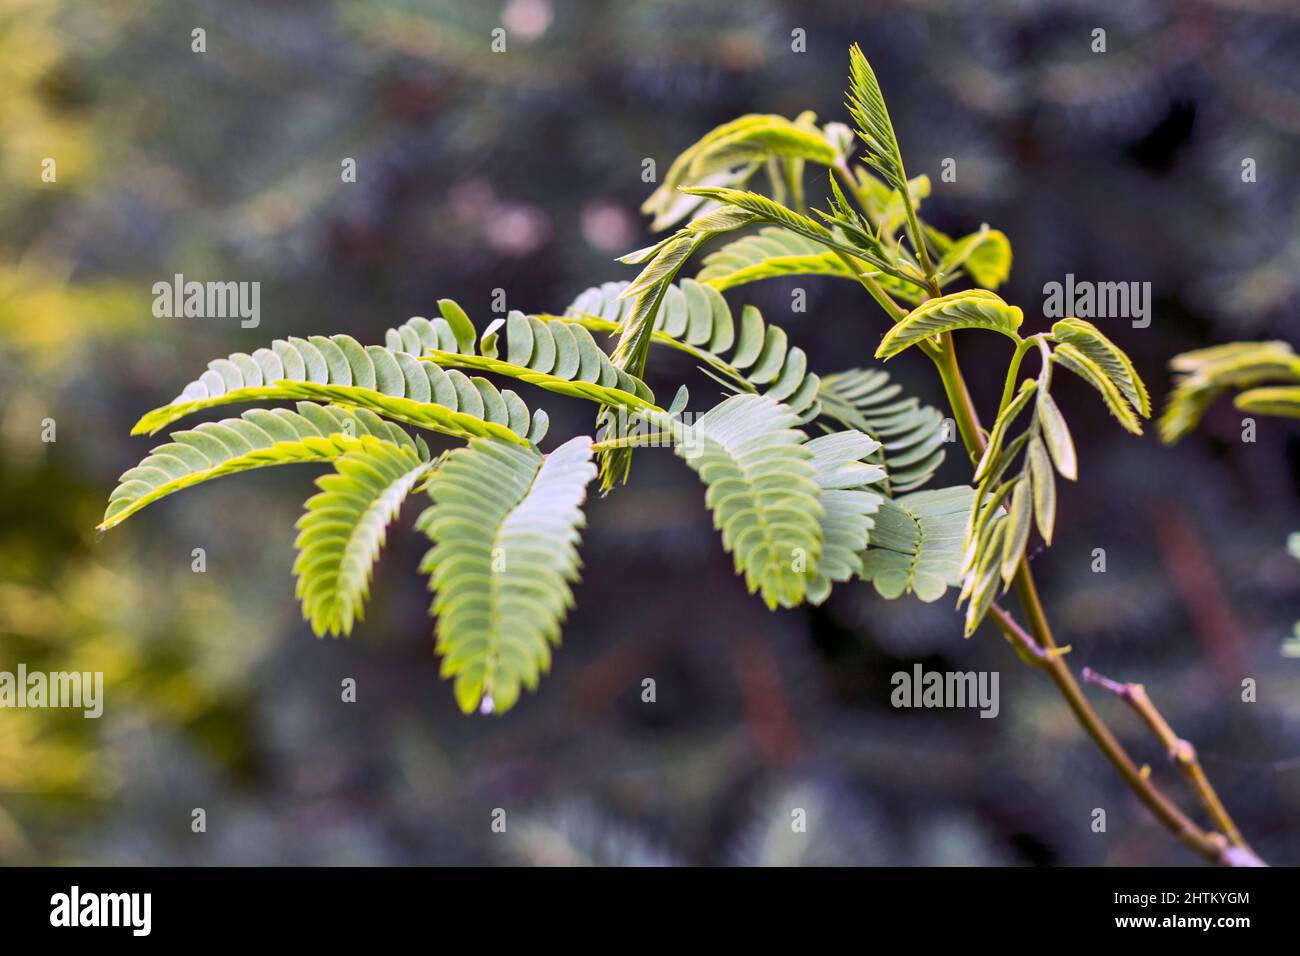 Spring shoots of Albizia julibrissin tree. This beautiful ornamental tree is located in the yard of a private house. Stock Photo